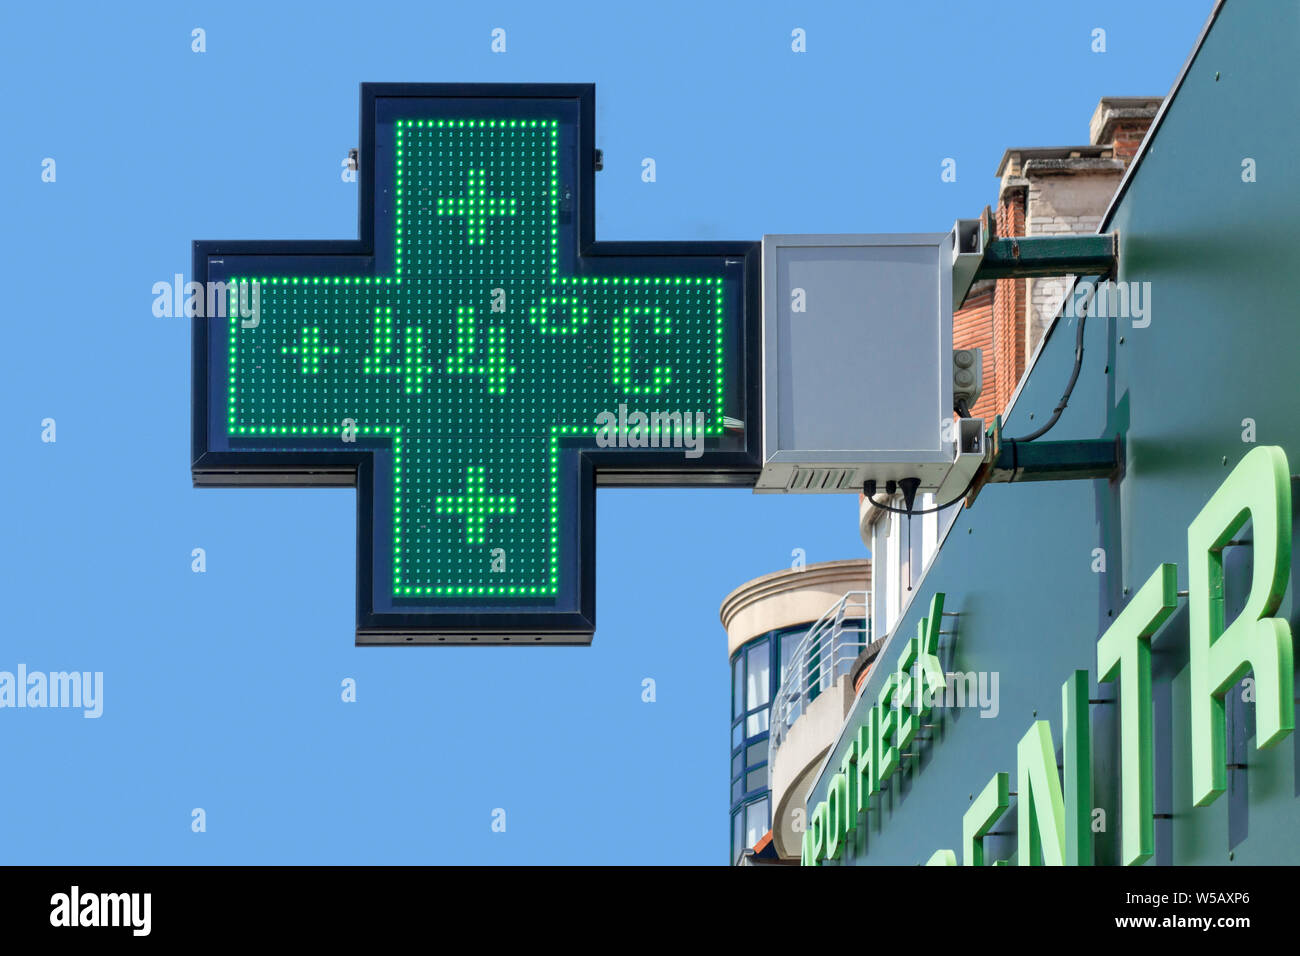 Thermometer in green pharmacy screen sign displays extremely hot temperature of 44 degrees Celsius / 44°C / 44 °C during summer heatwave / heat wave Stock Photo